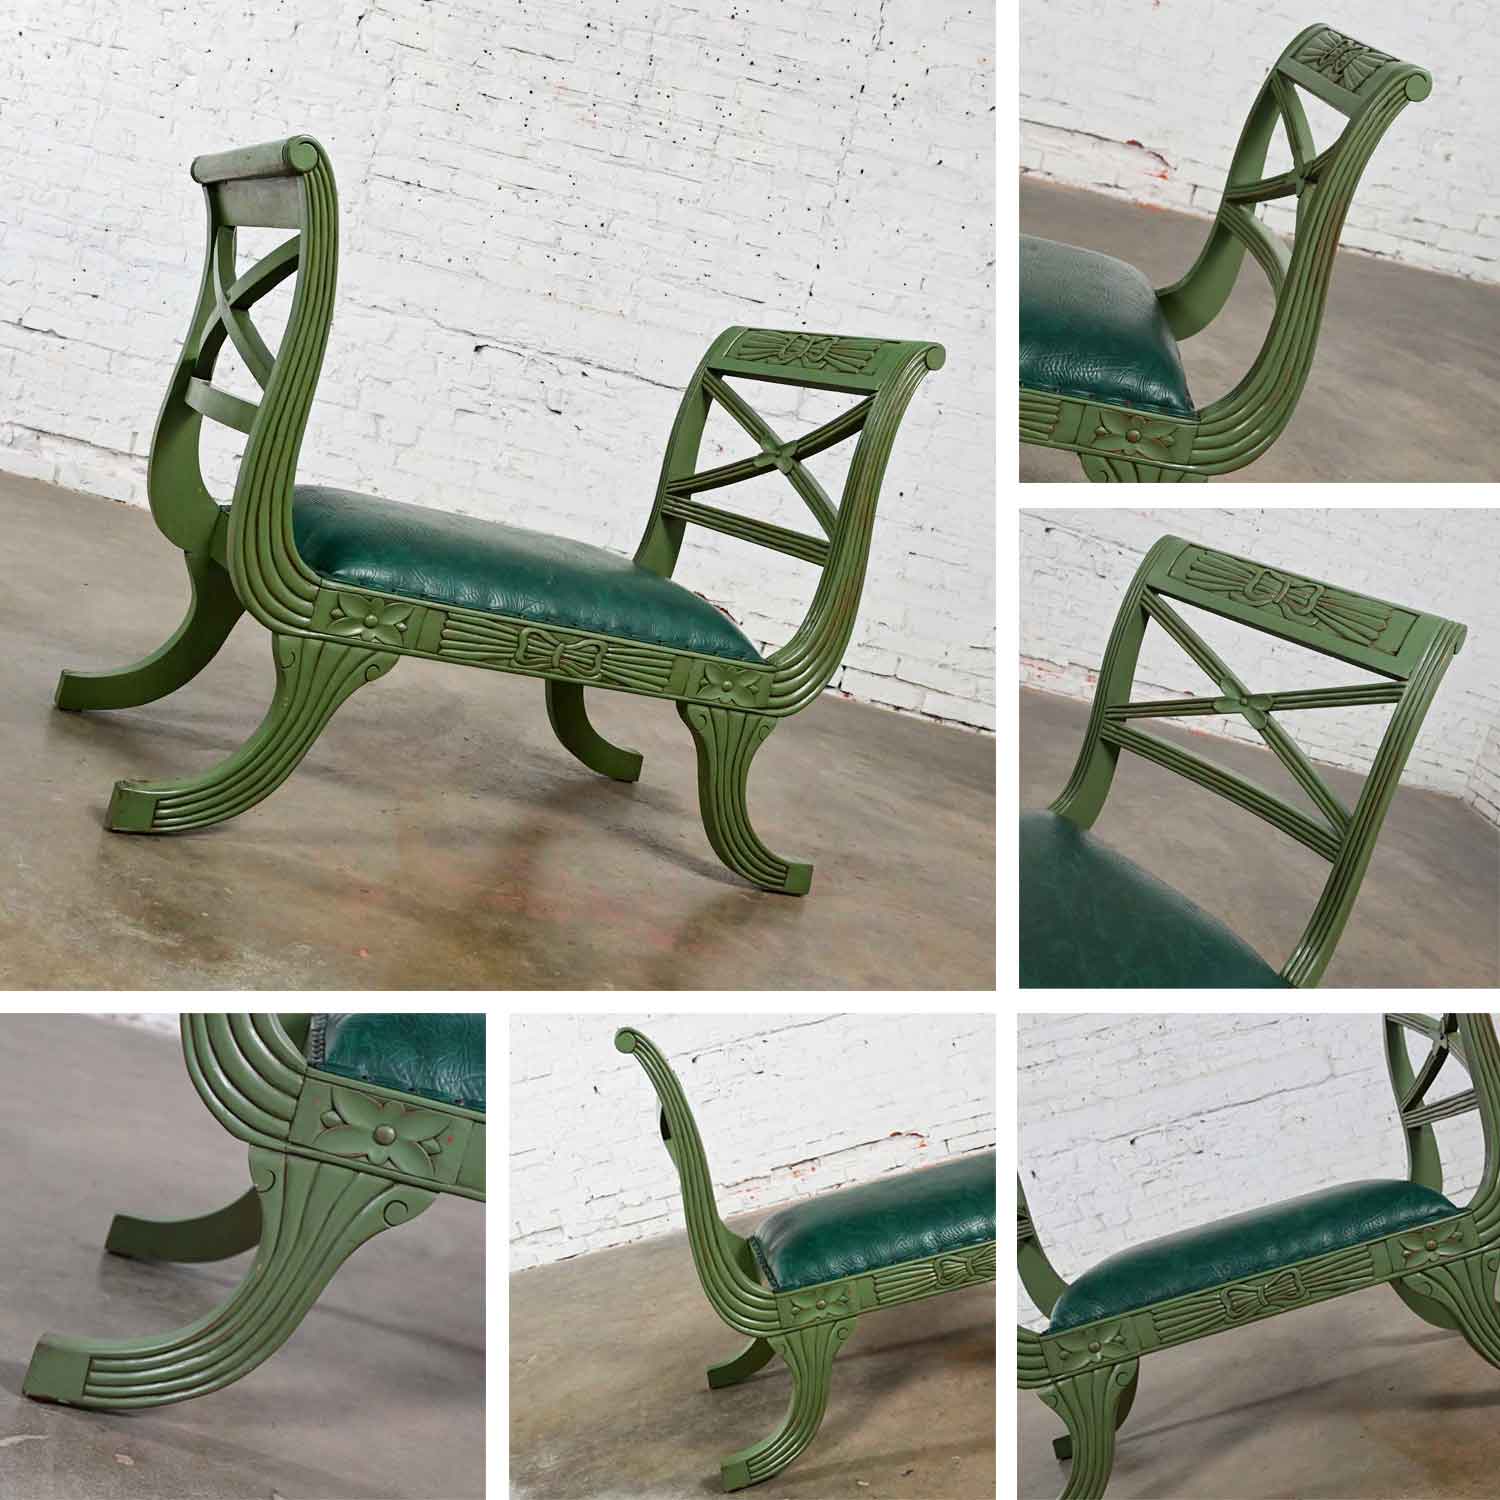 Mid-20th Century Neoclassic Style Hunter Green Faux Textured Leather Short Bench or Vanity Stool